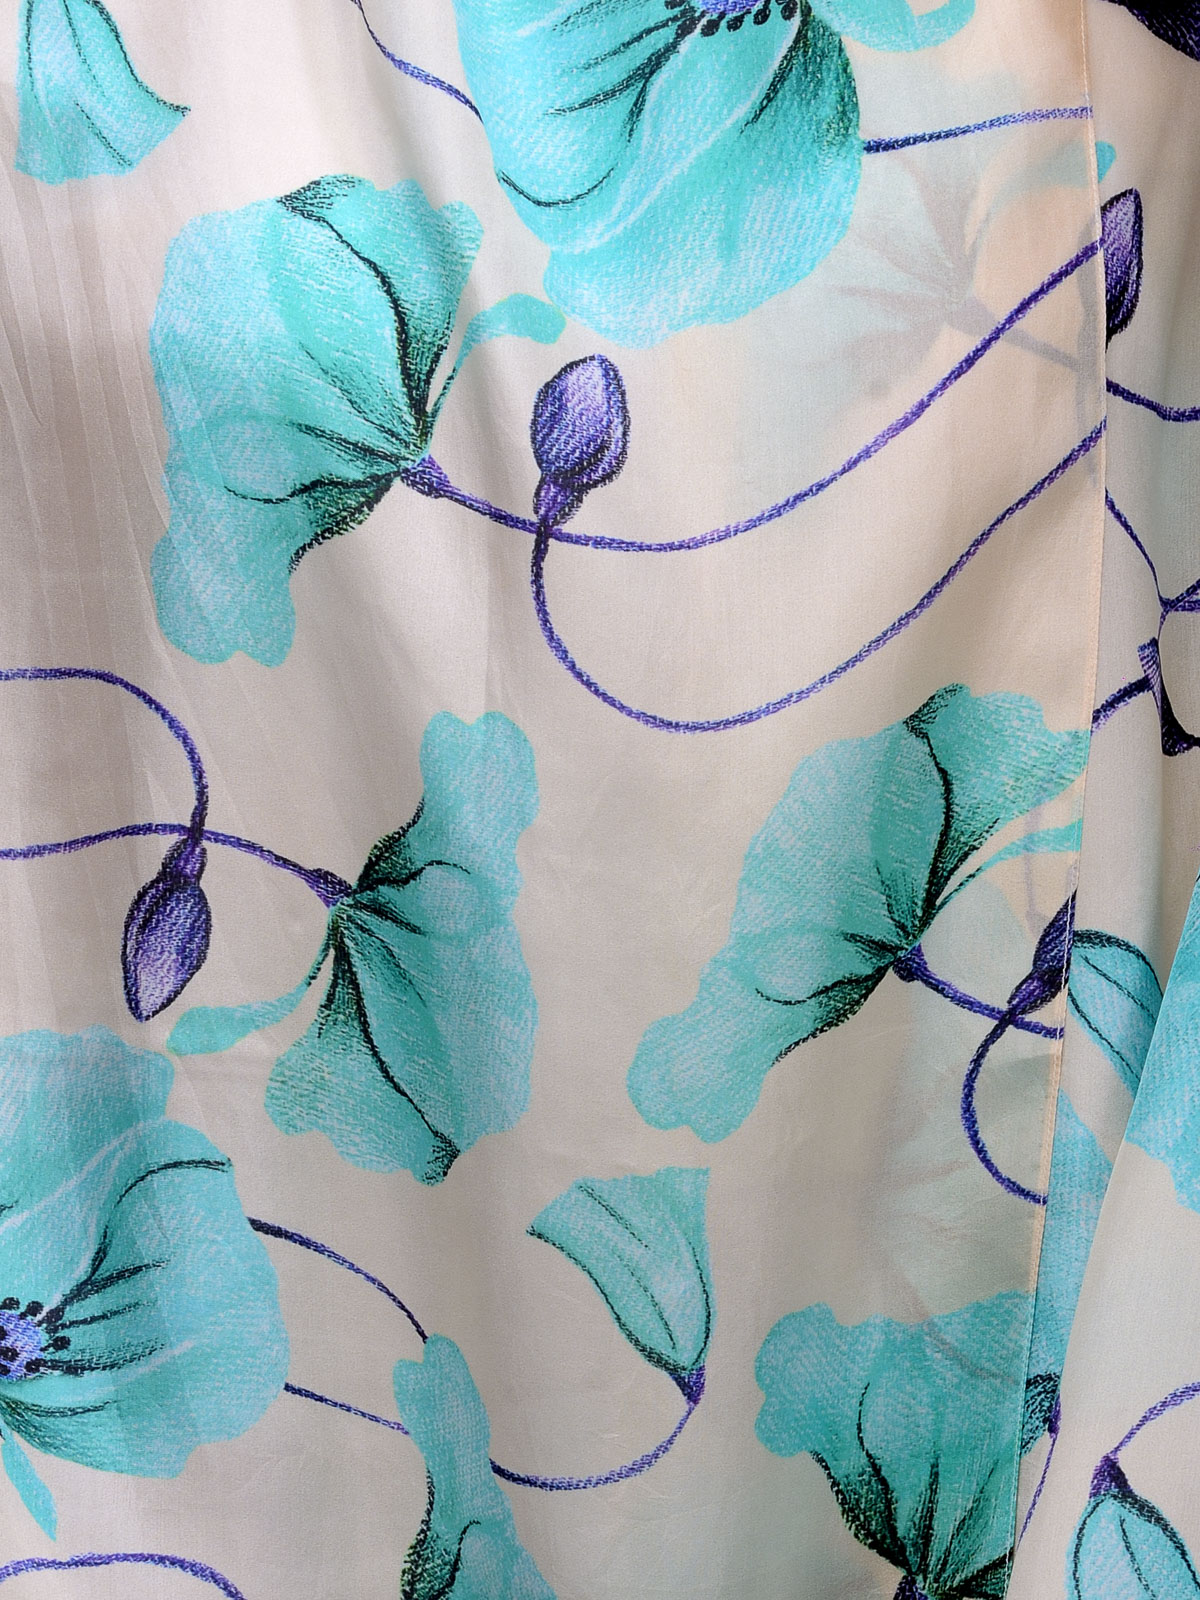 OFFWHITE AND BLUE FLORAL SILK STOLE